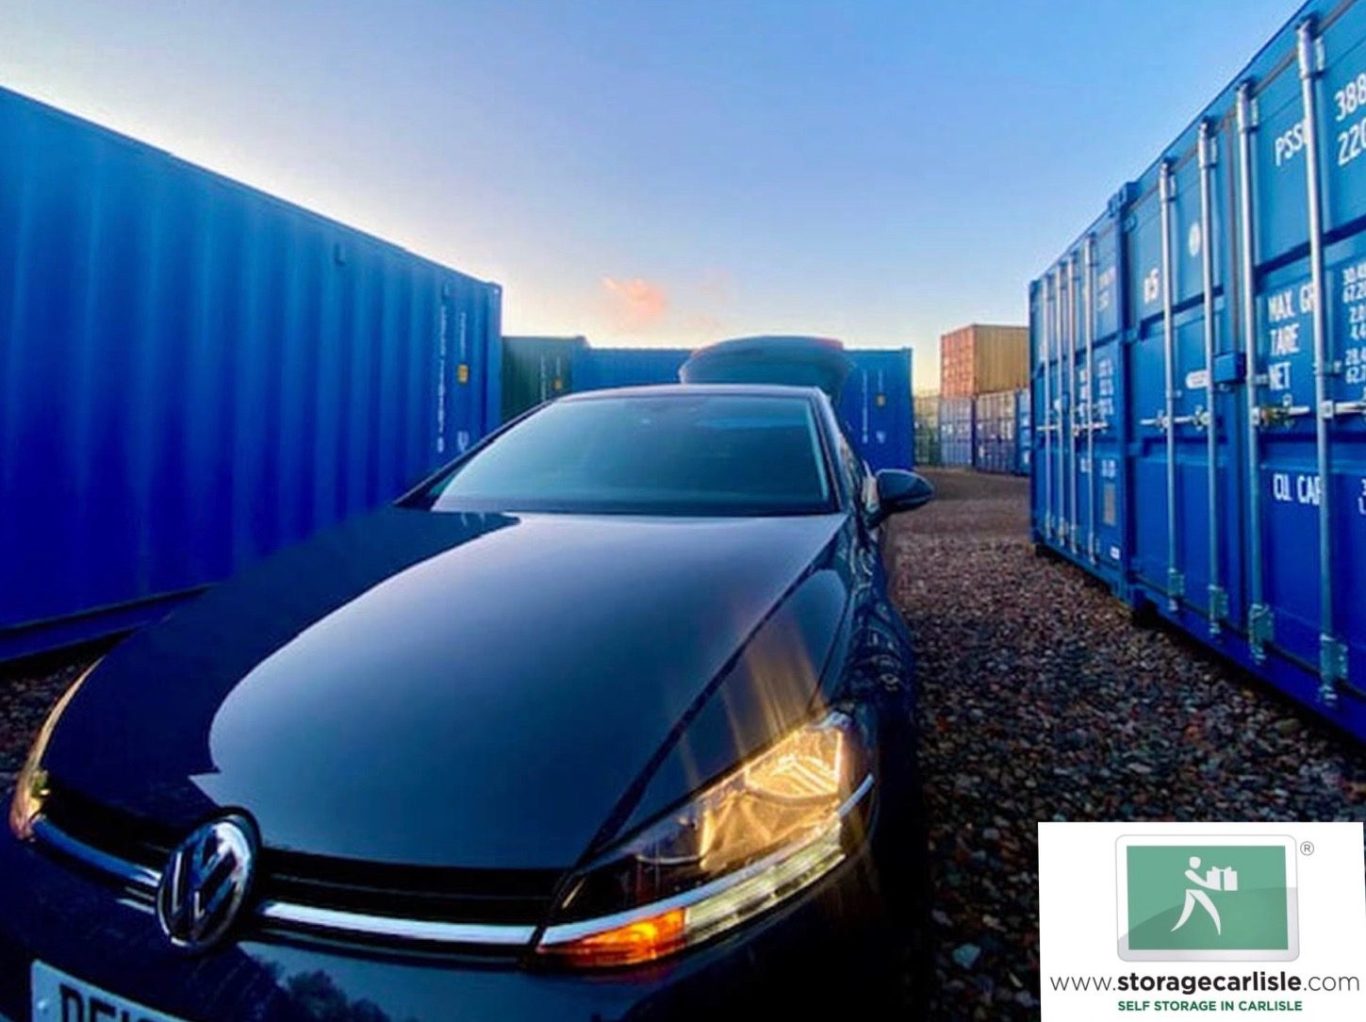 shipping container depot full of storage units with a car parked in the foreground